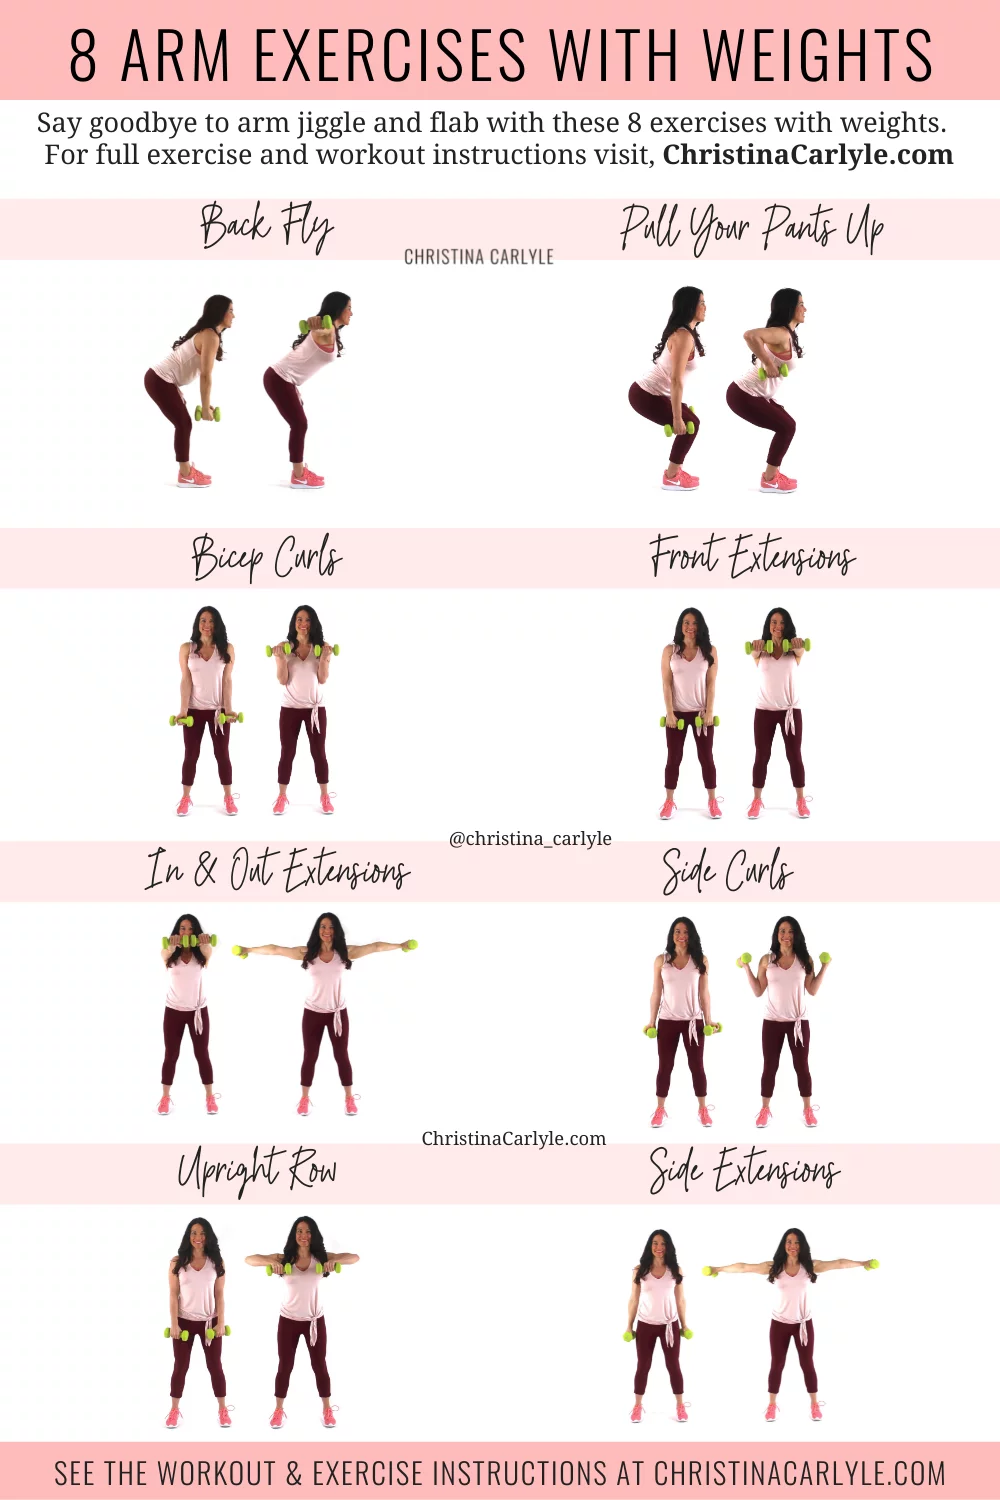 https://www.christinacarlyle.com/wp-content/uploads/2018/08/Arm-Exercises-with-weights.png